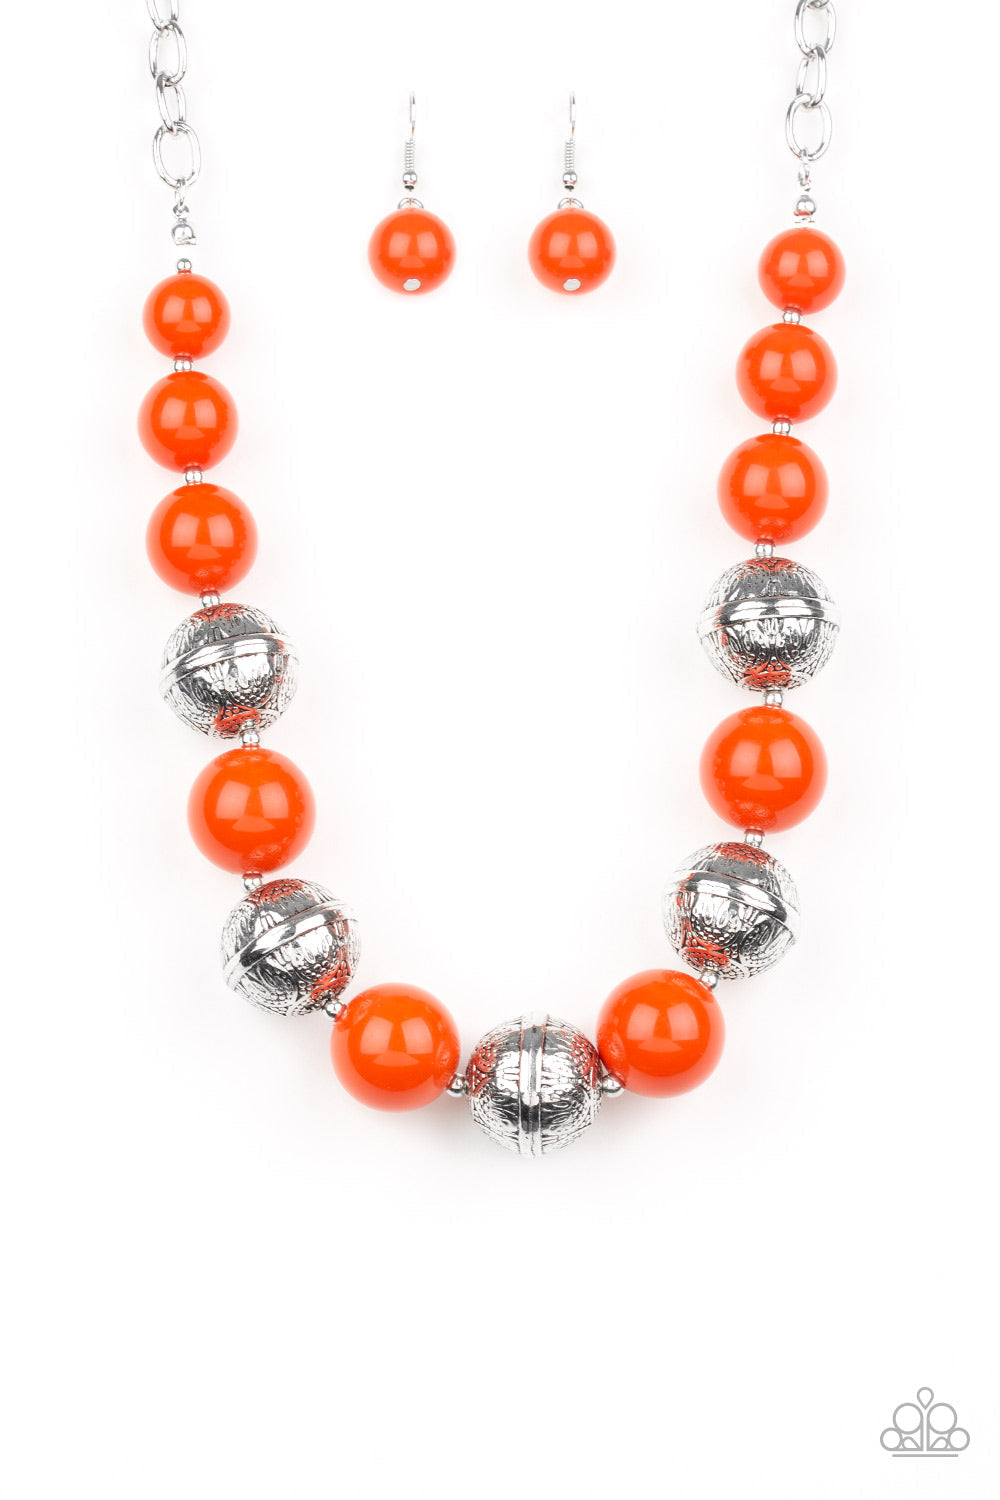 Floral Fusion - Orange and Silver Necklace - Paparazzi Accessories - Infused with dainty silver accents, a bubbly collection of hearty orange beads and floral embossed silver beads are threaded along an invisible wire below the collar for a seasonal look. Features an adjustable clasp closure.